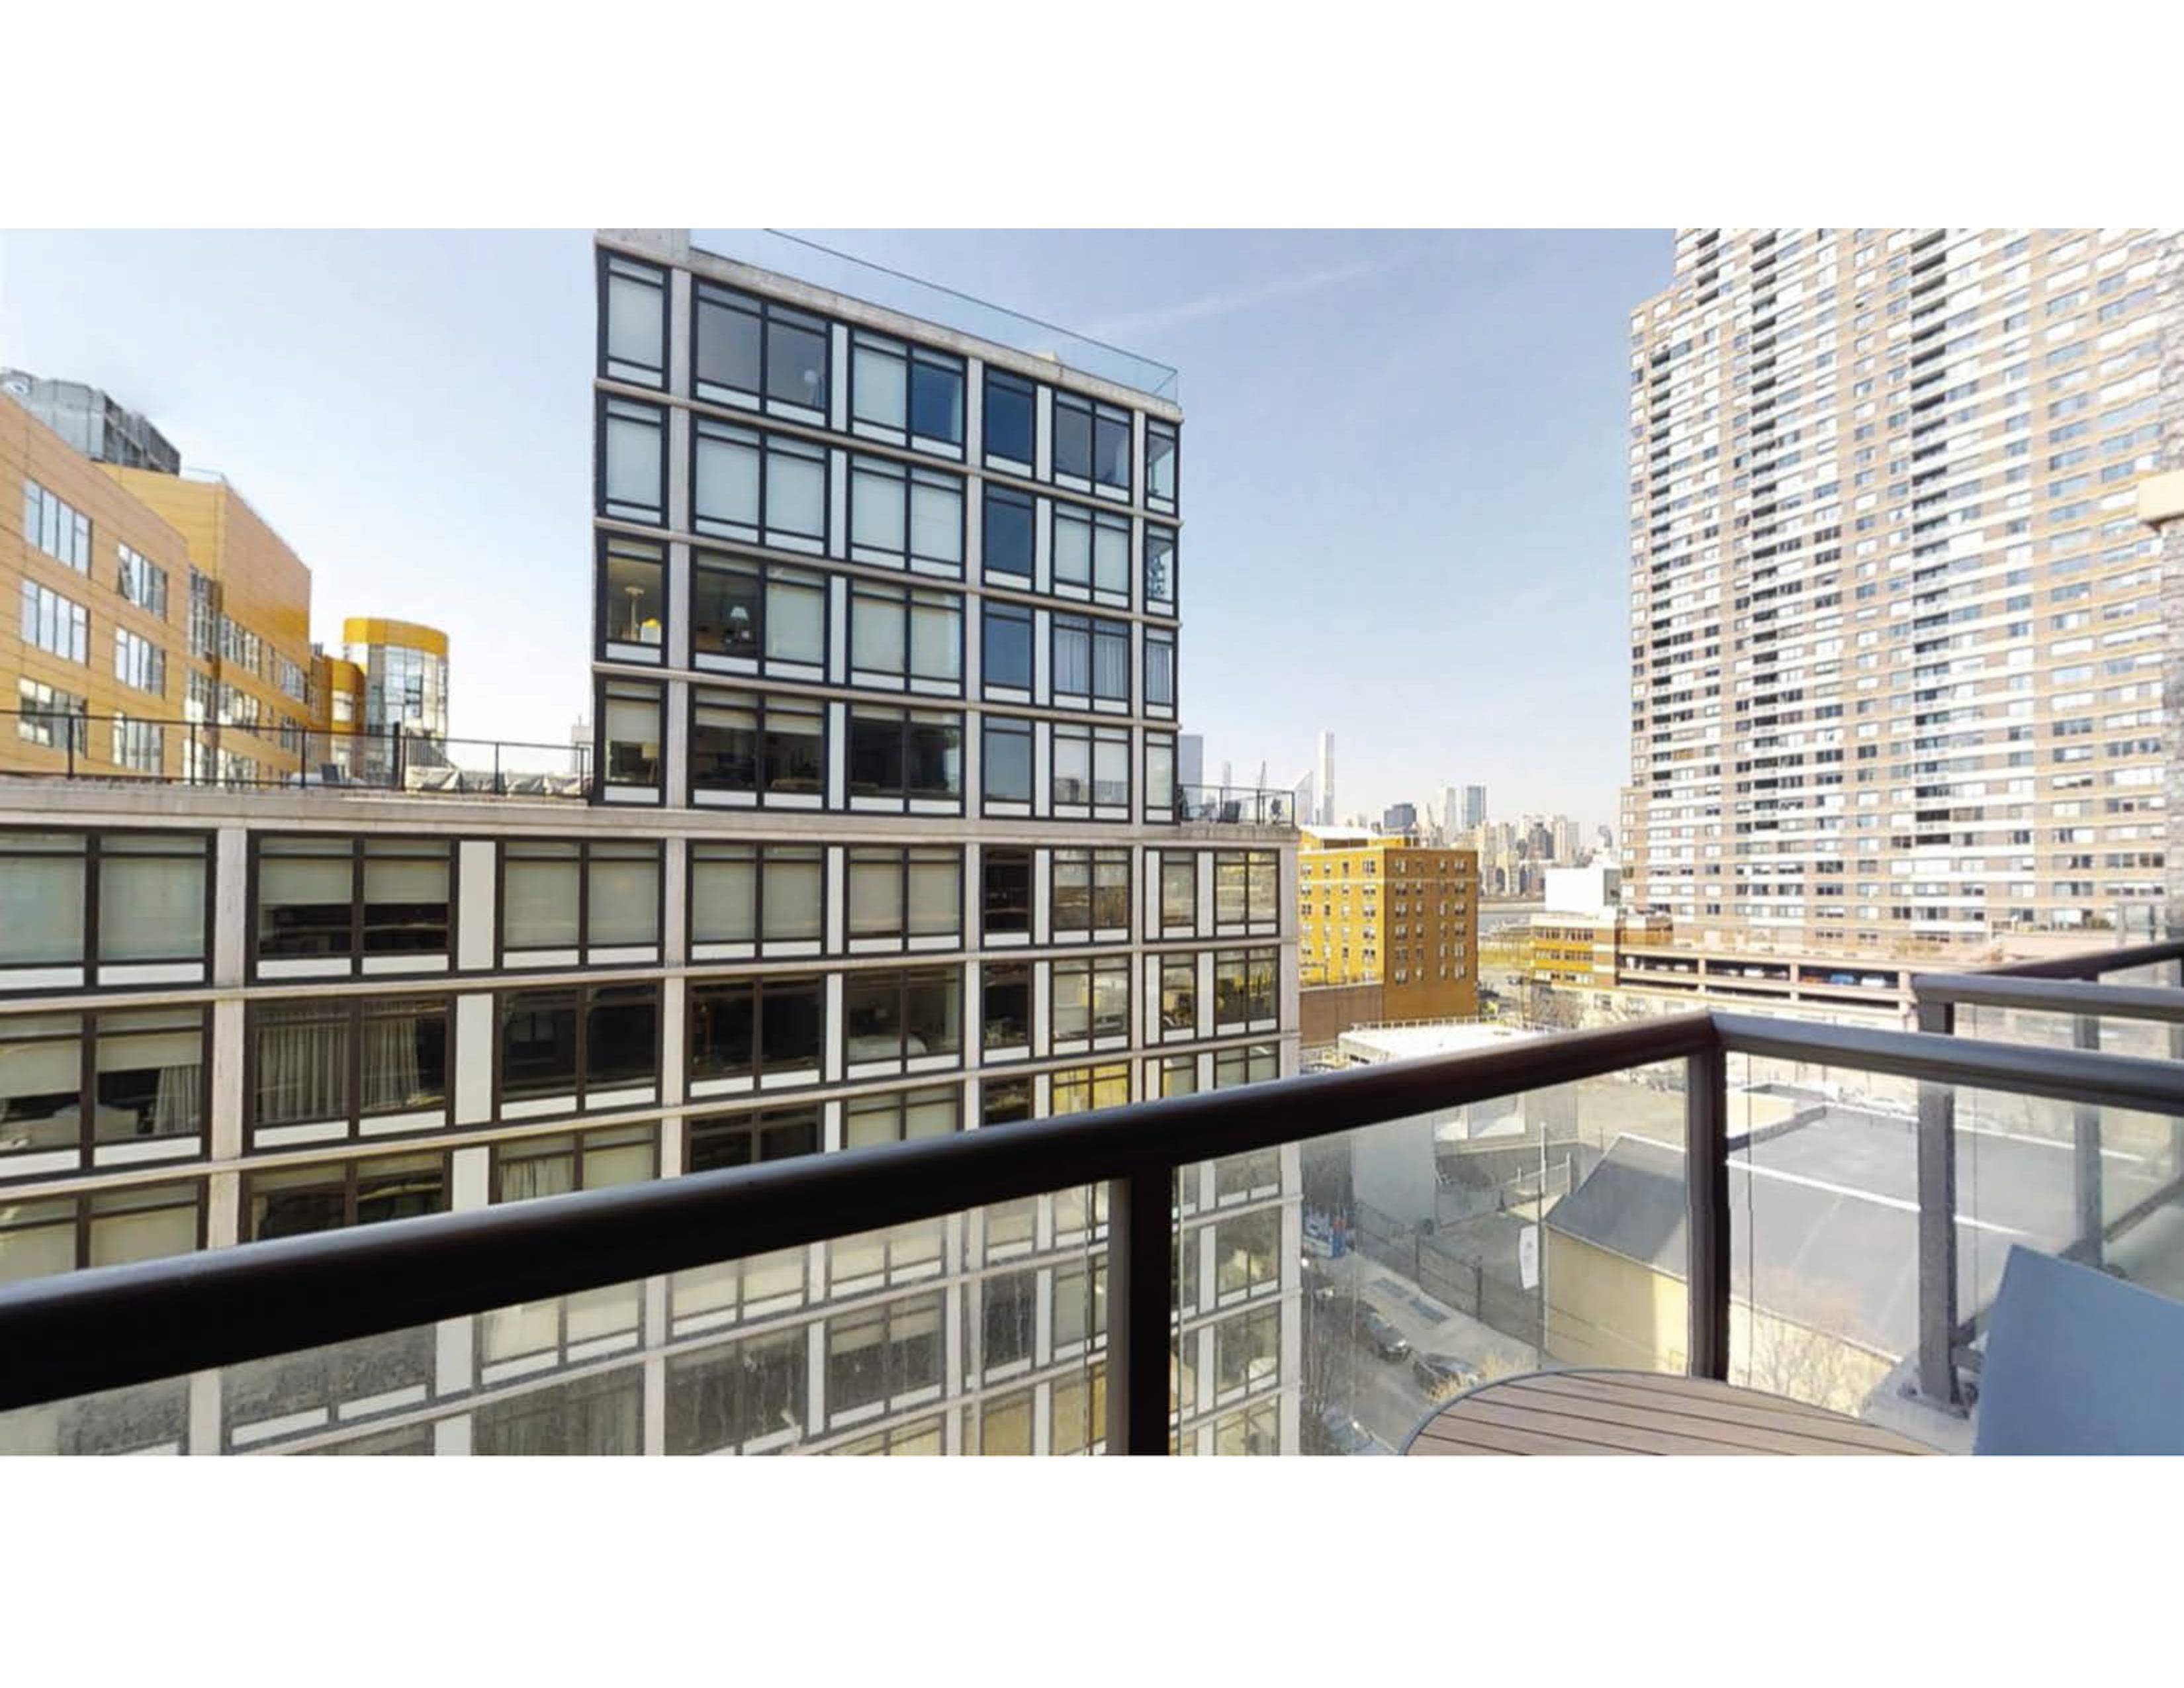 NEWLY REDUCED amp ; WONDERFUL 1 BR 1 BA with BALCONY CLOSE to GANTRY PARK WATERFRONTTake the 3D tour into this delightful condo home that offers a spacious interior of ...